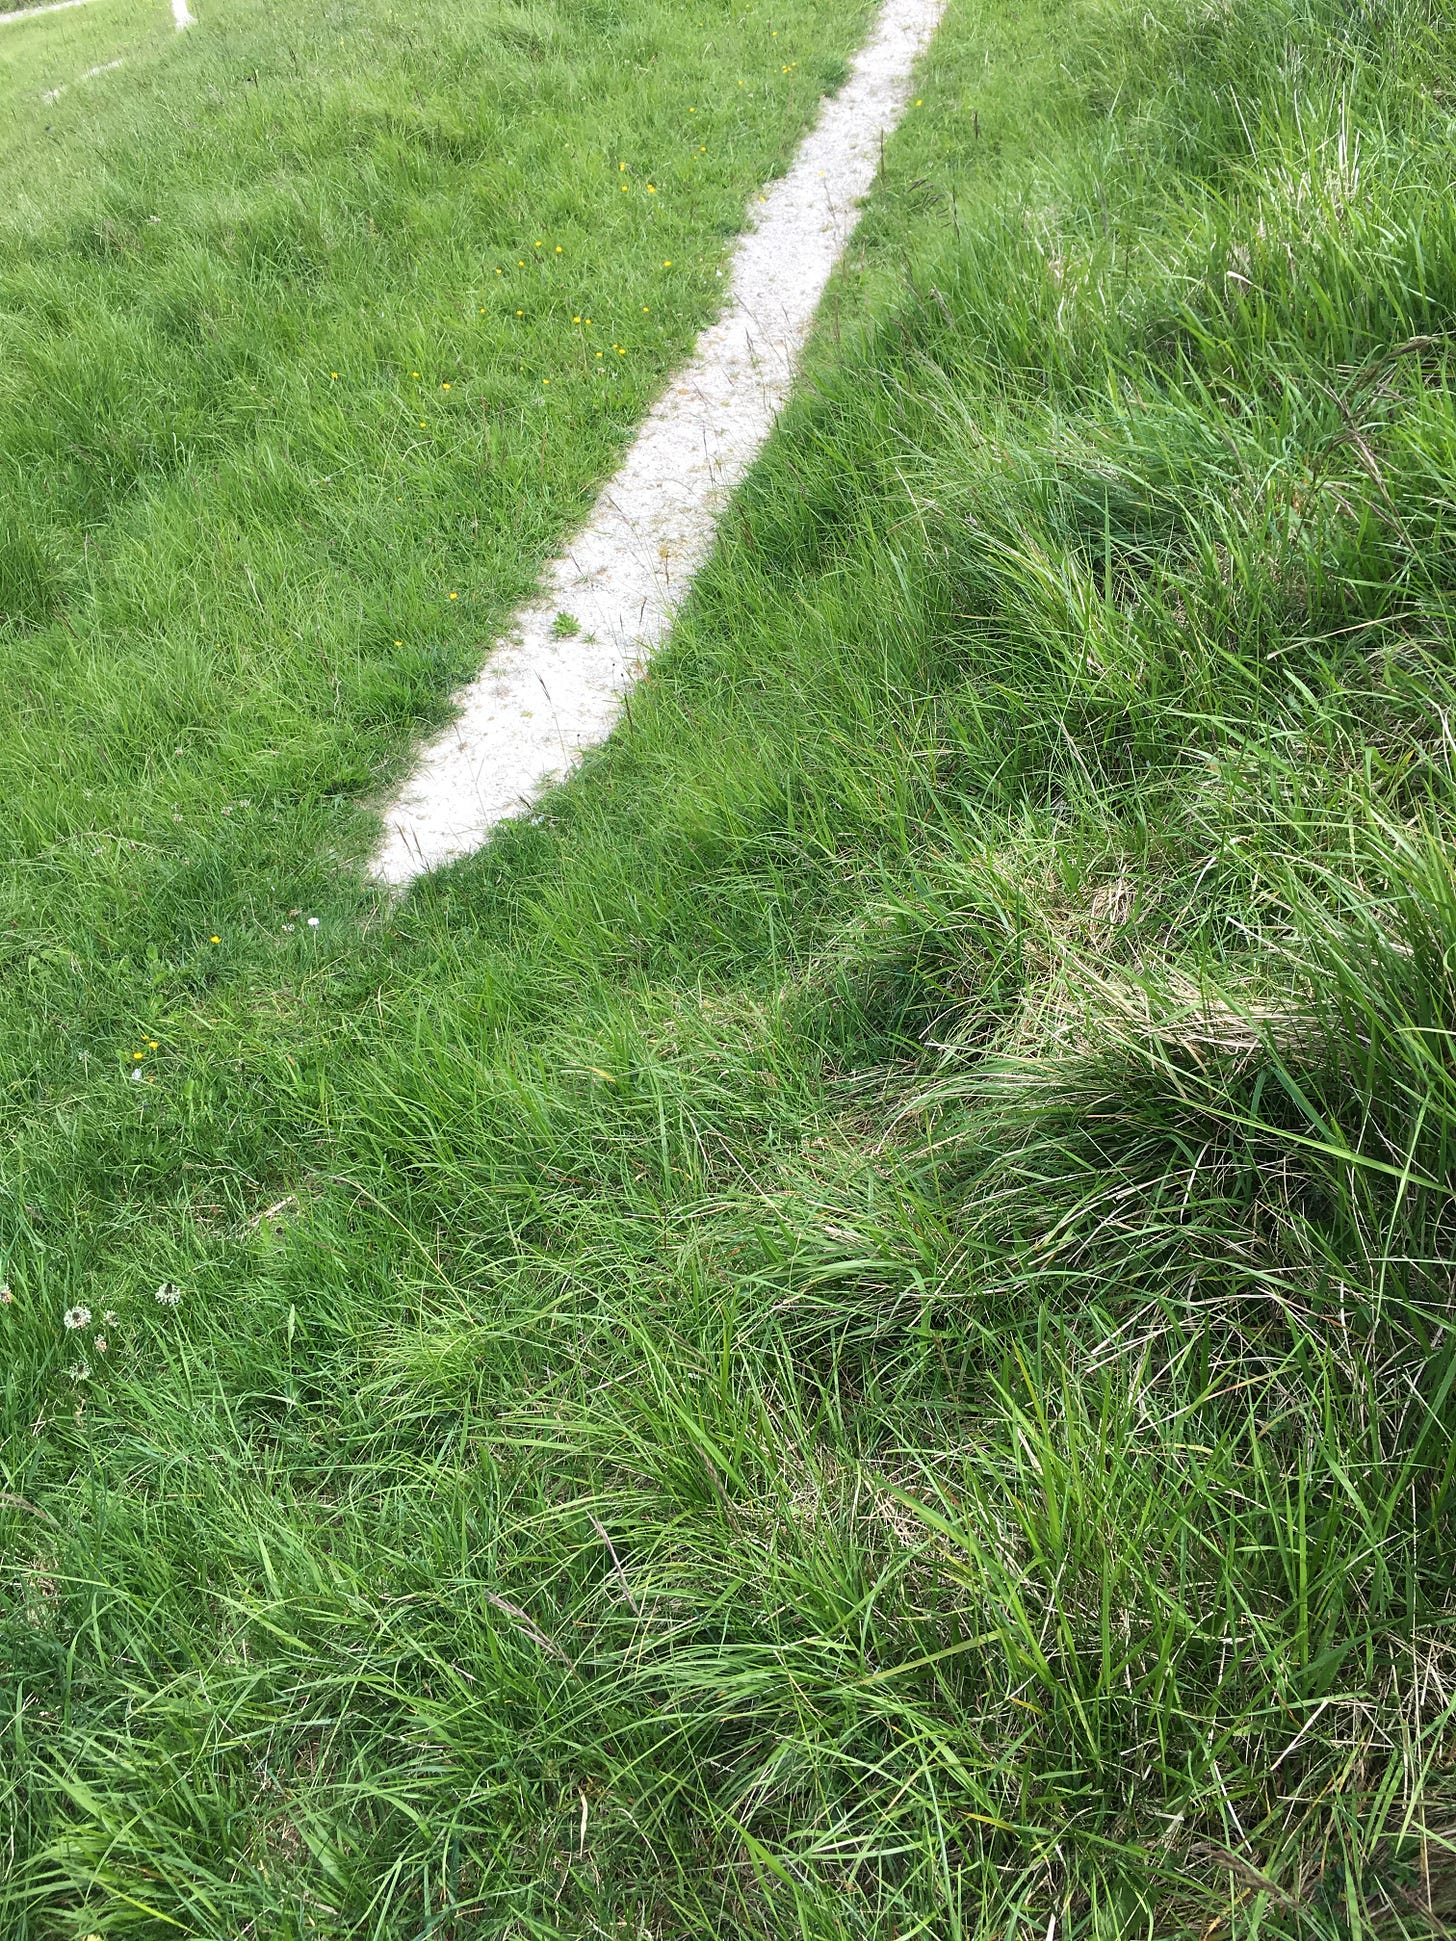 A broad line of white chalk in tall grass.